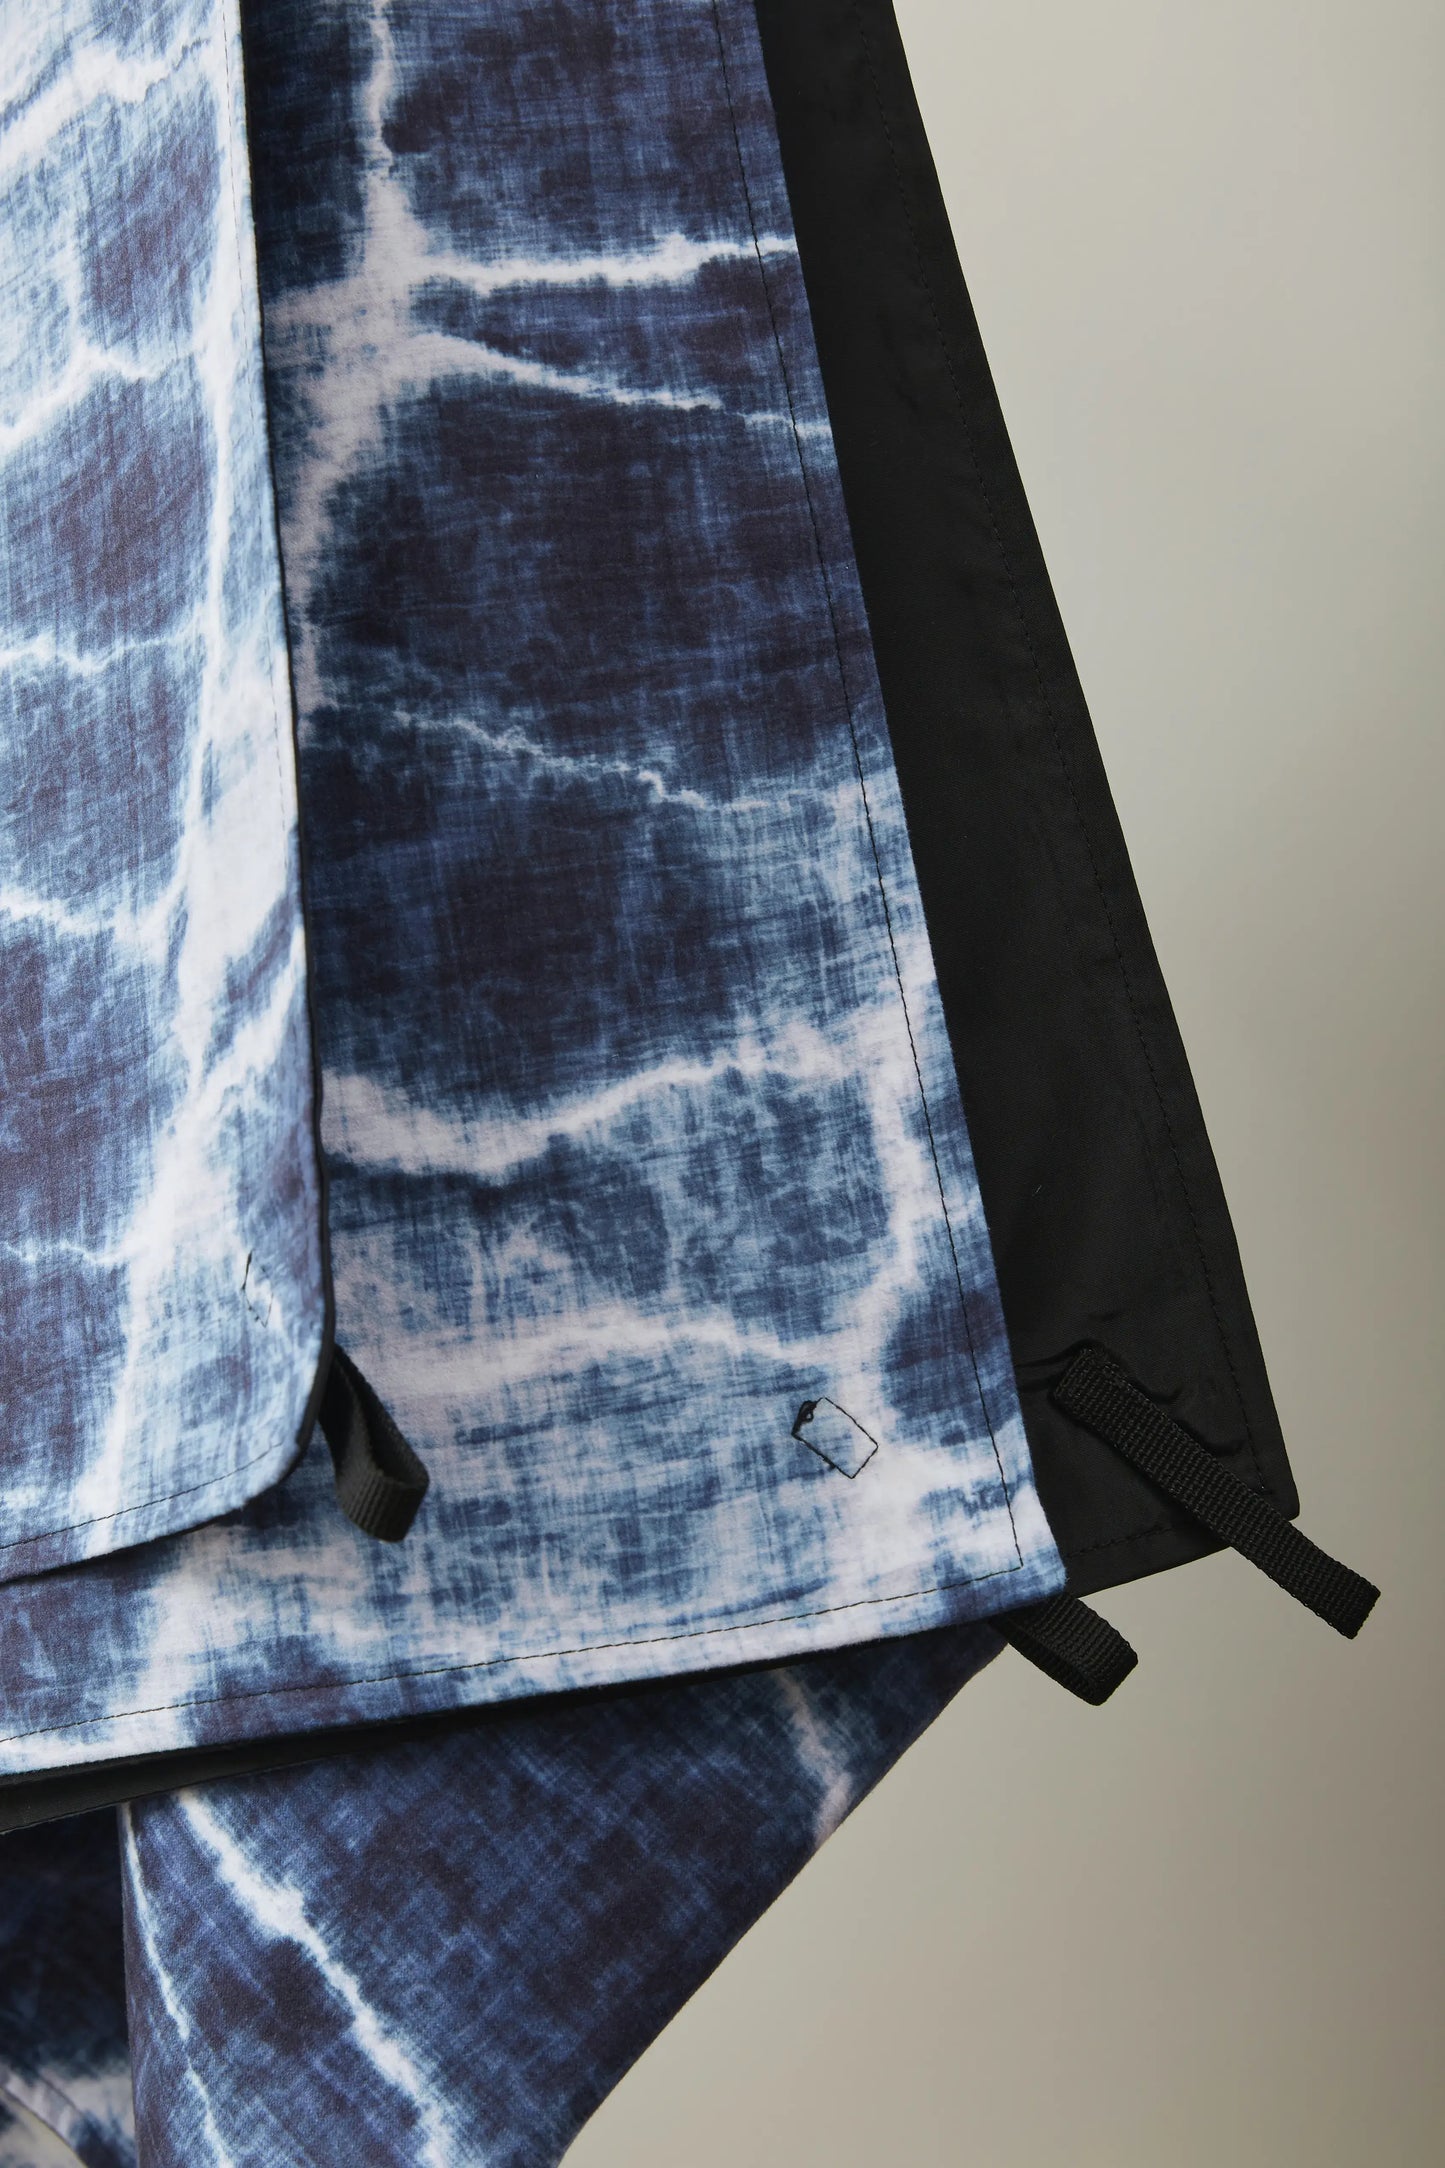 Closeup of a blue and white blanket hanging.